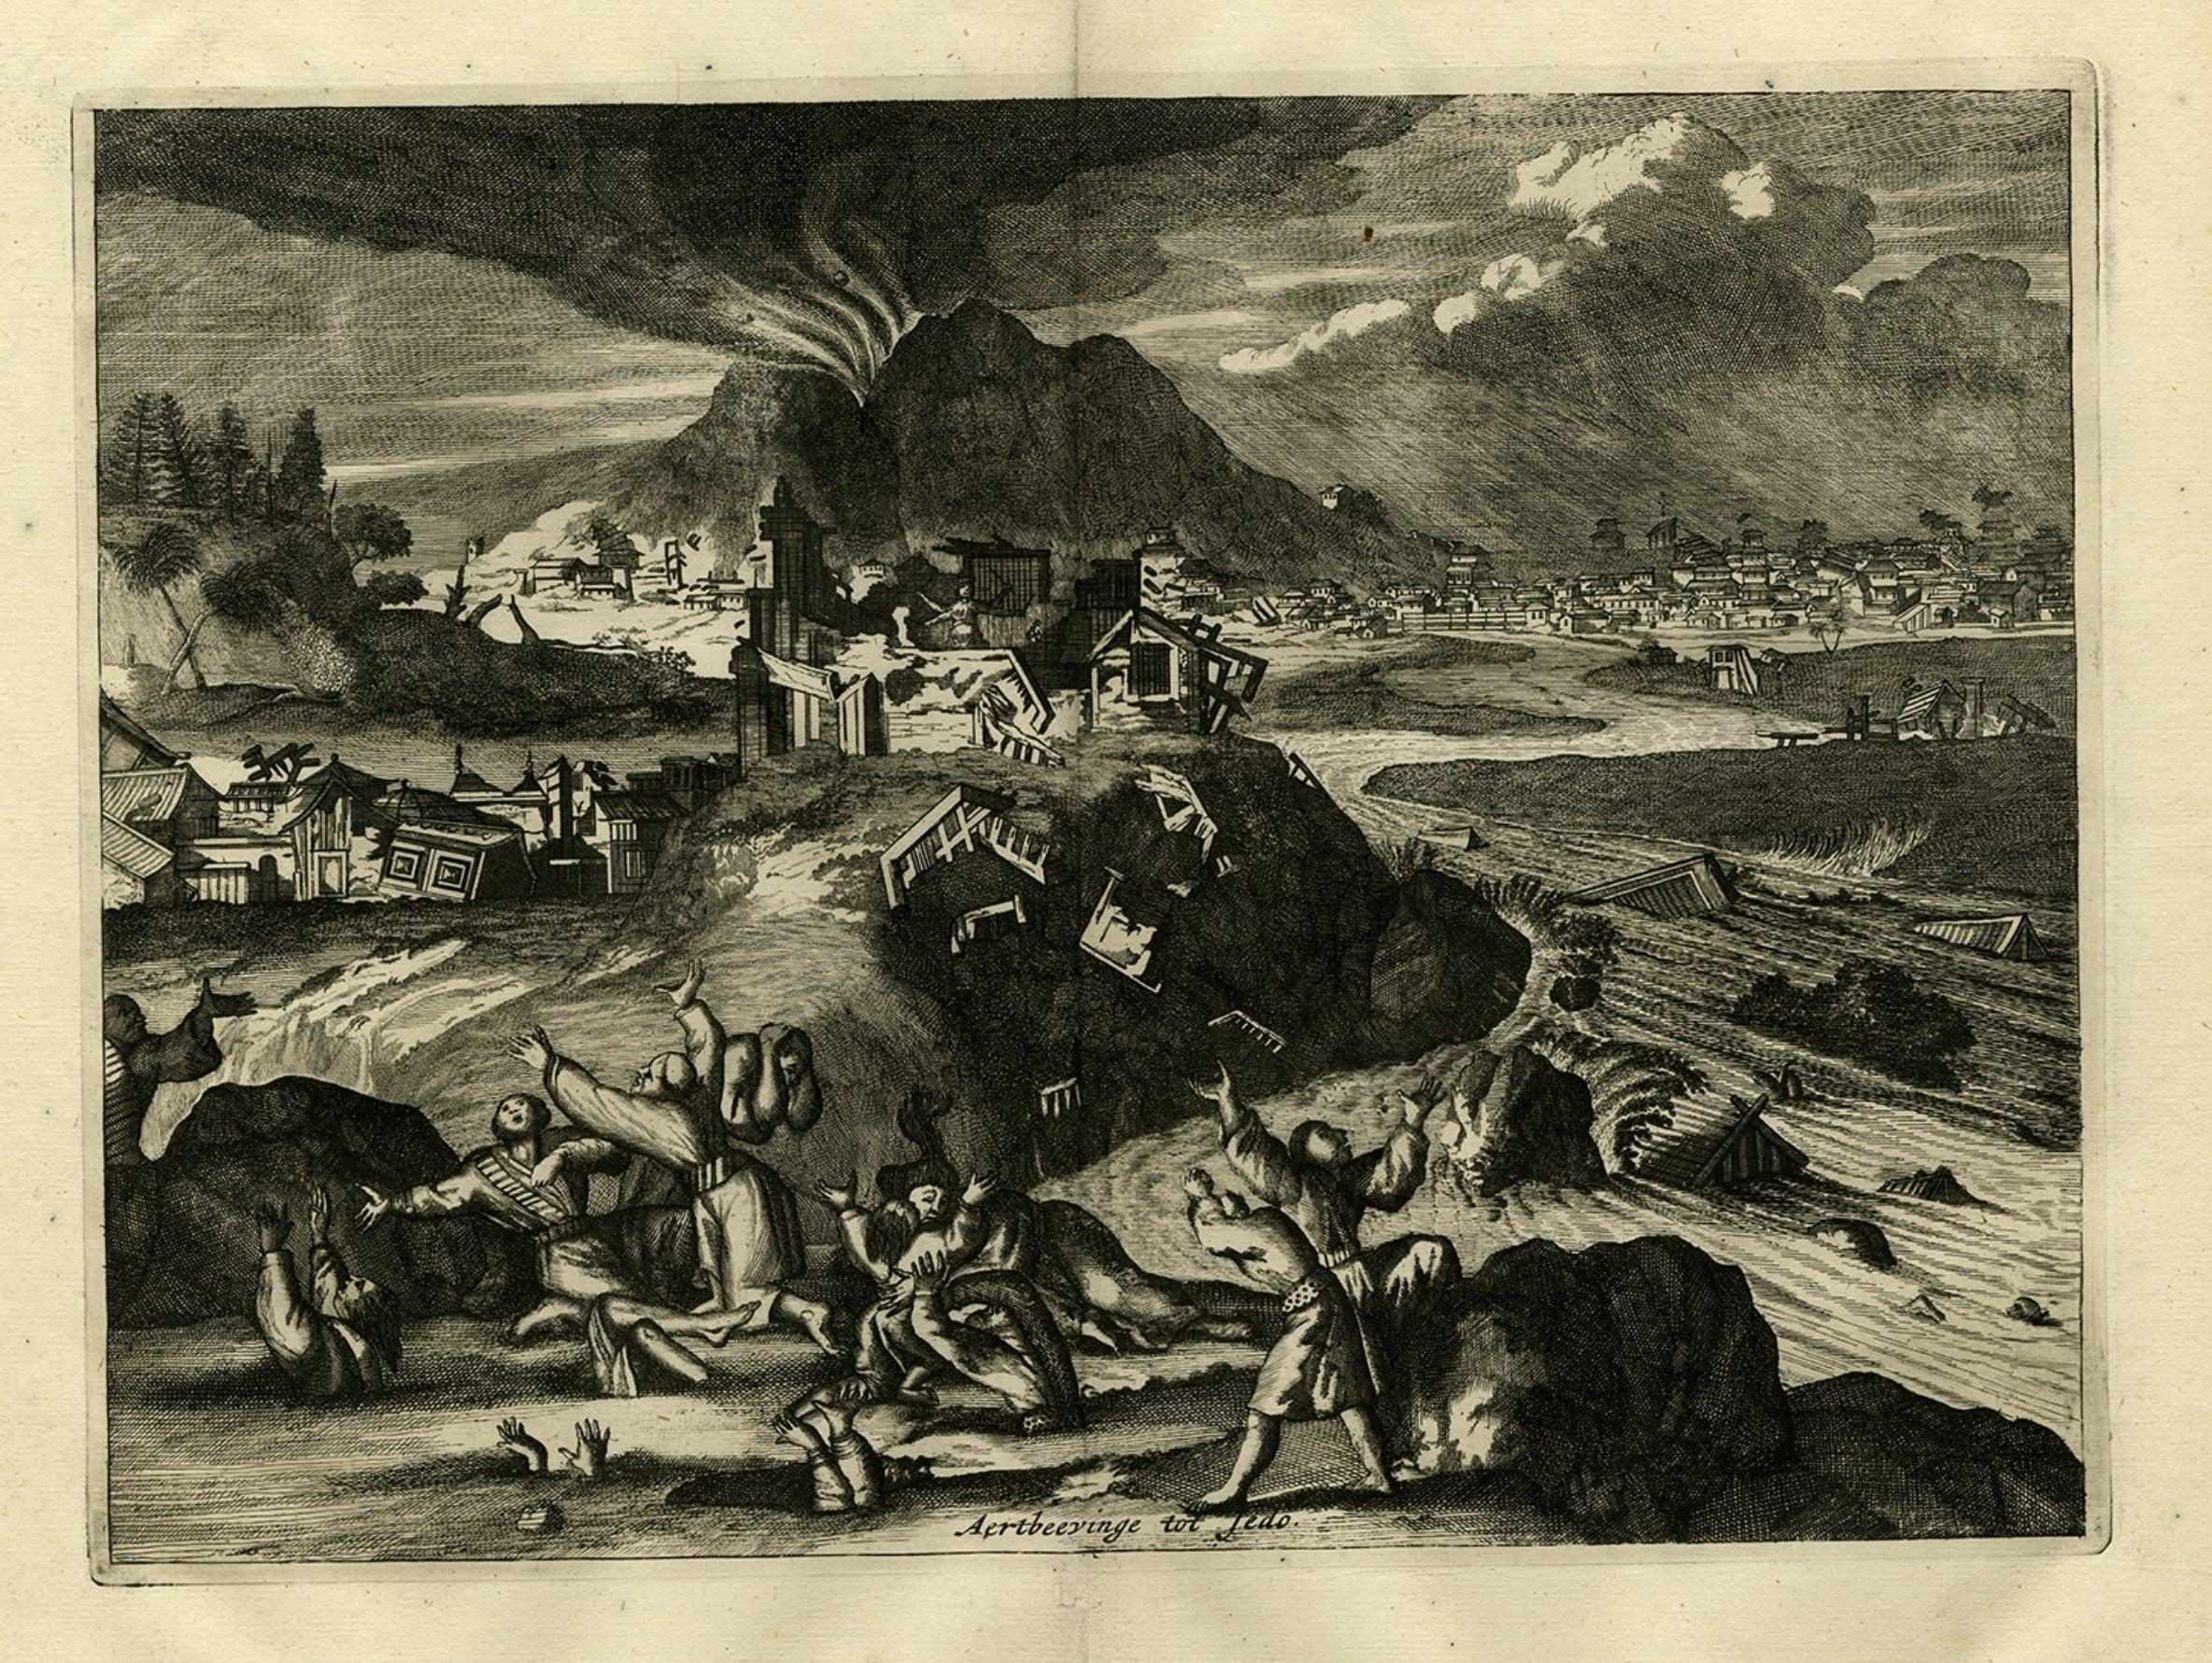 Antique print, titled: 'Aertbeevinge tot Jedo.' - ('Earthquake in Edo'). 

A temple falls to ruins because of an earthquake in Yedo (or Edo, Jeddo; now Tokyo). Men and women lament in the foreground, and are drowned in the raging flood. Arnoldus